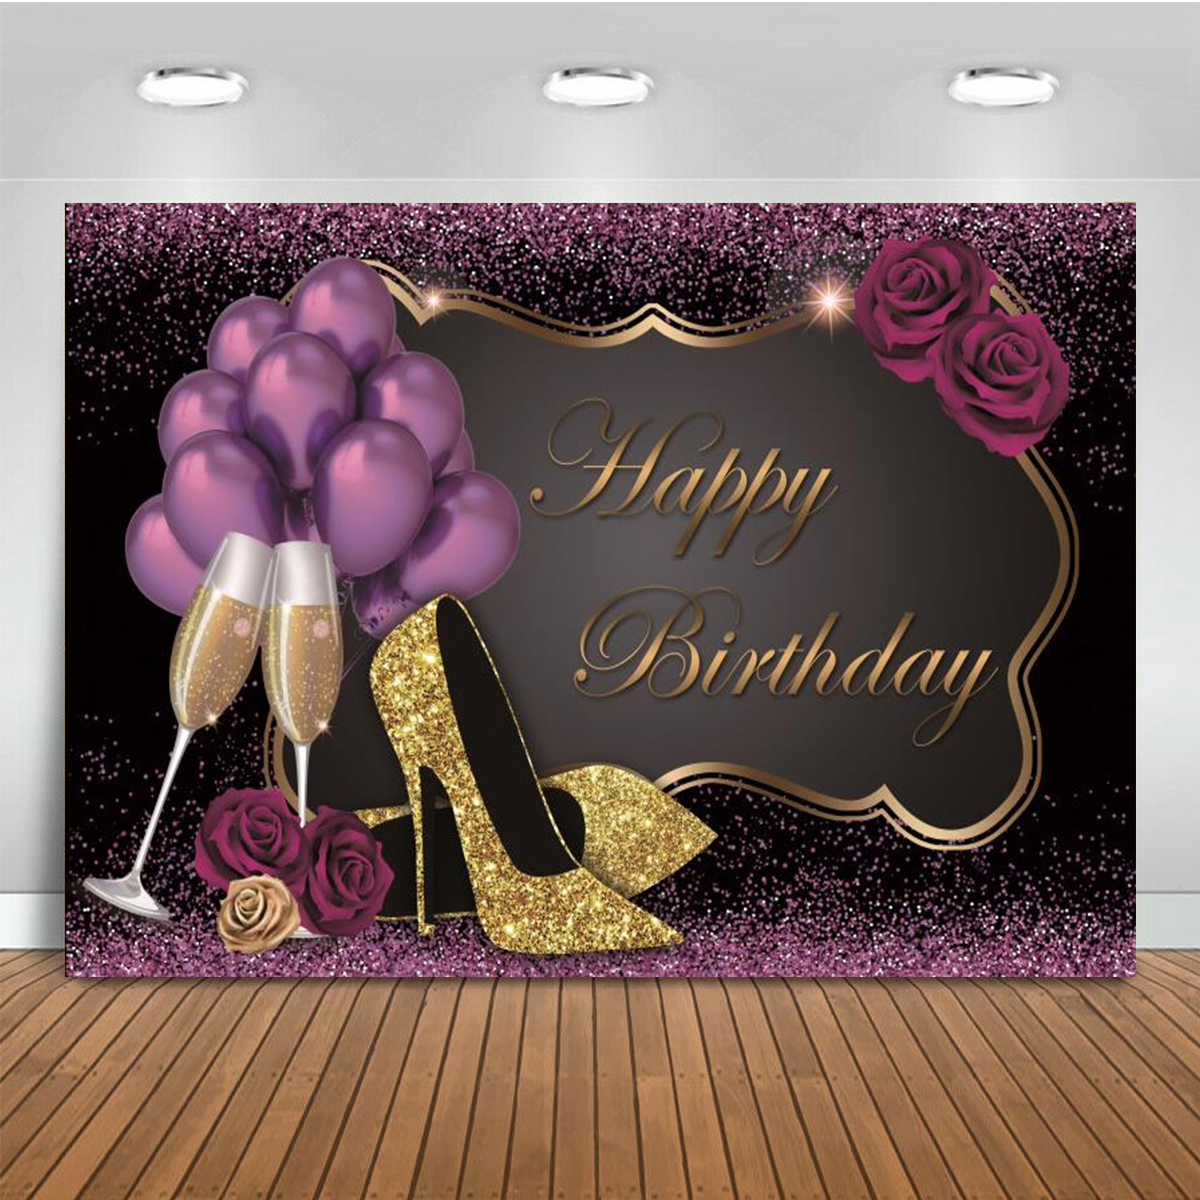 Happy-Birthday-Party-Photo-Photography-Backdrop-Cloth-Studio-Background-Home-Decoration-Props-1821314-8